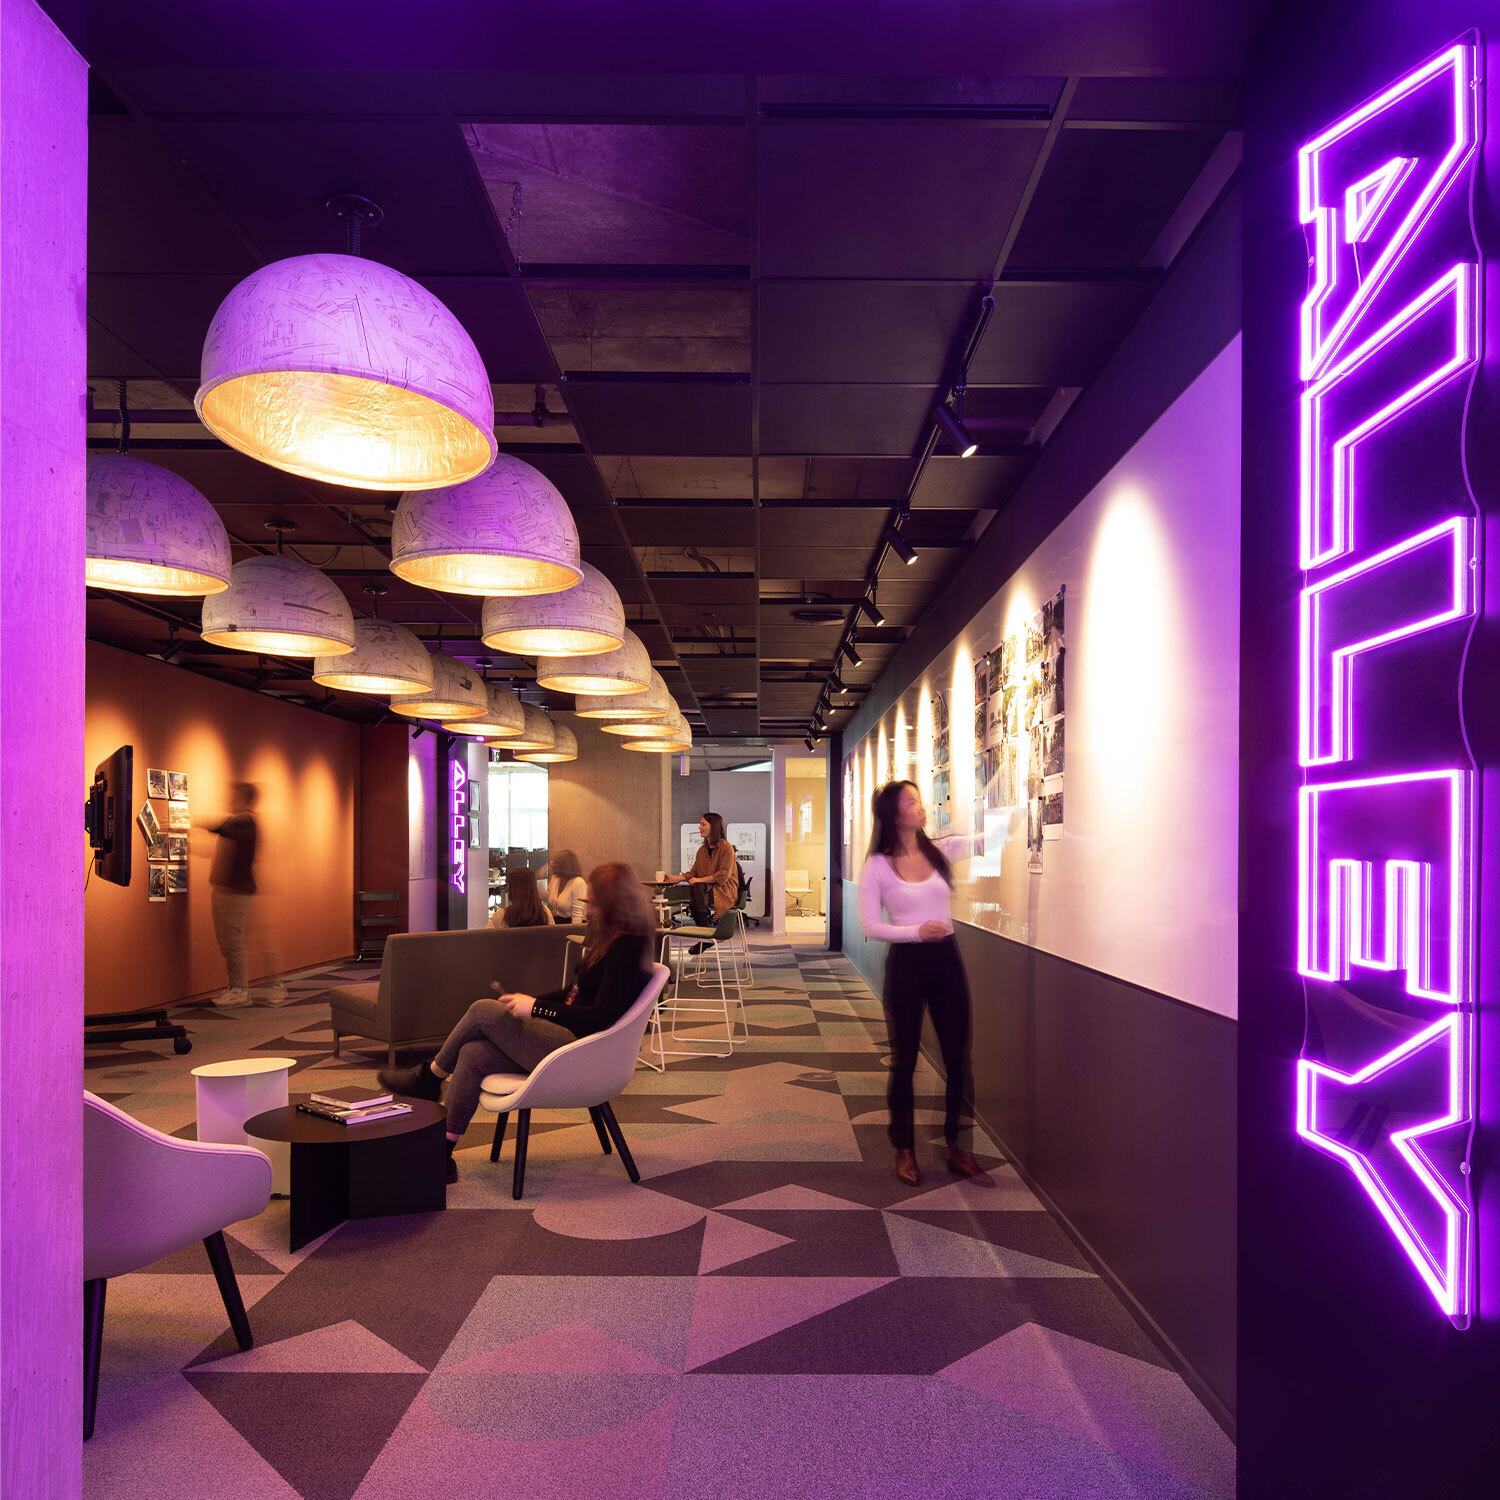 Neon purple lights inside an office building saying "Alley"